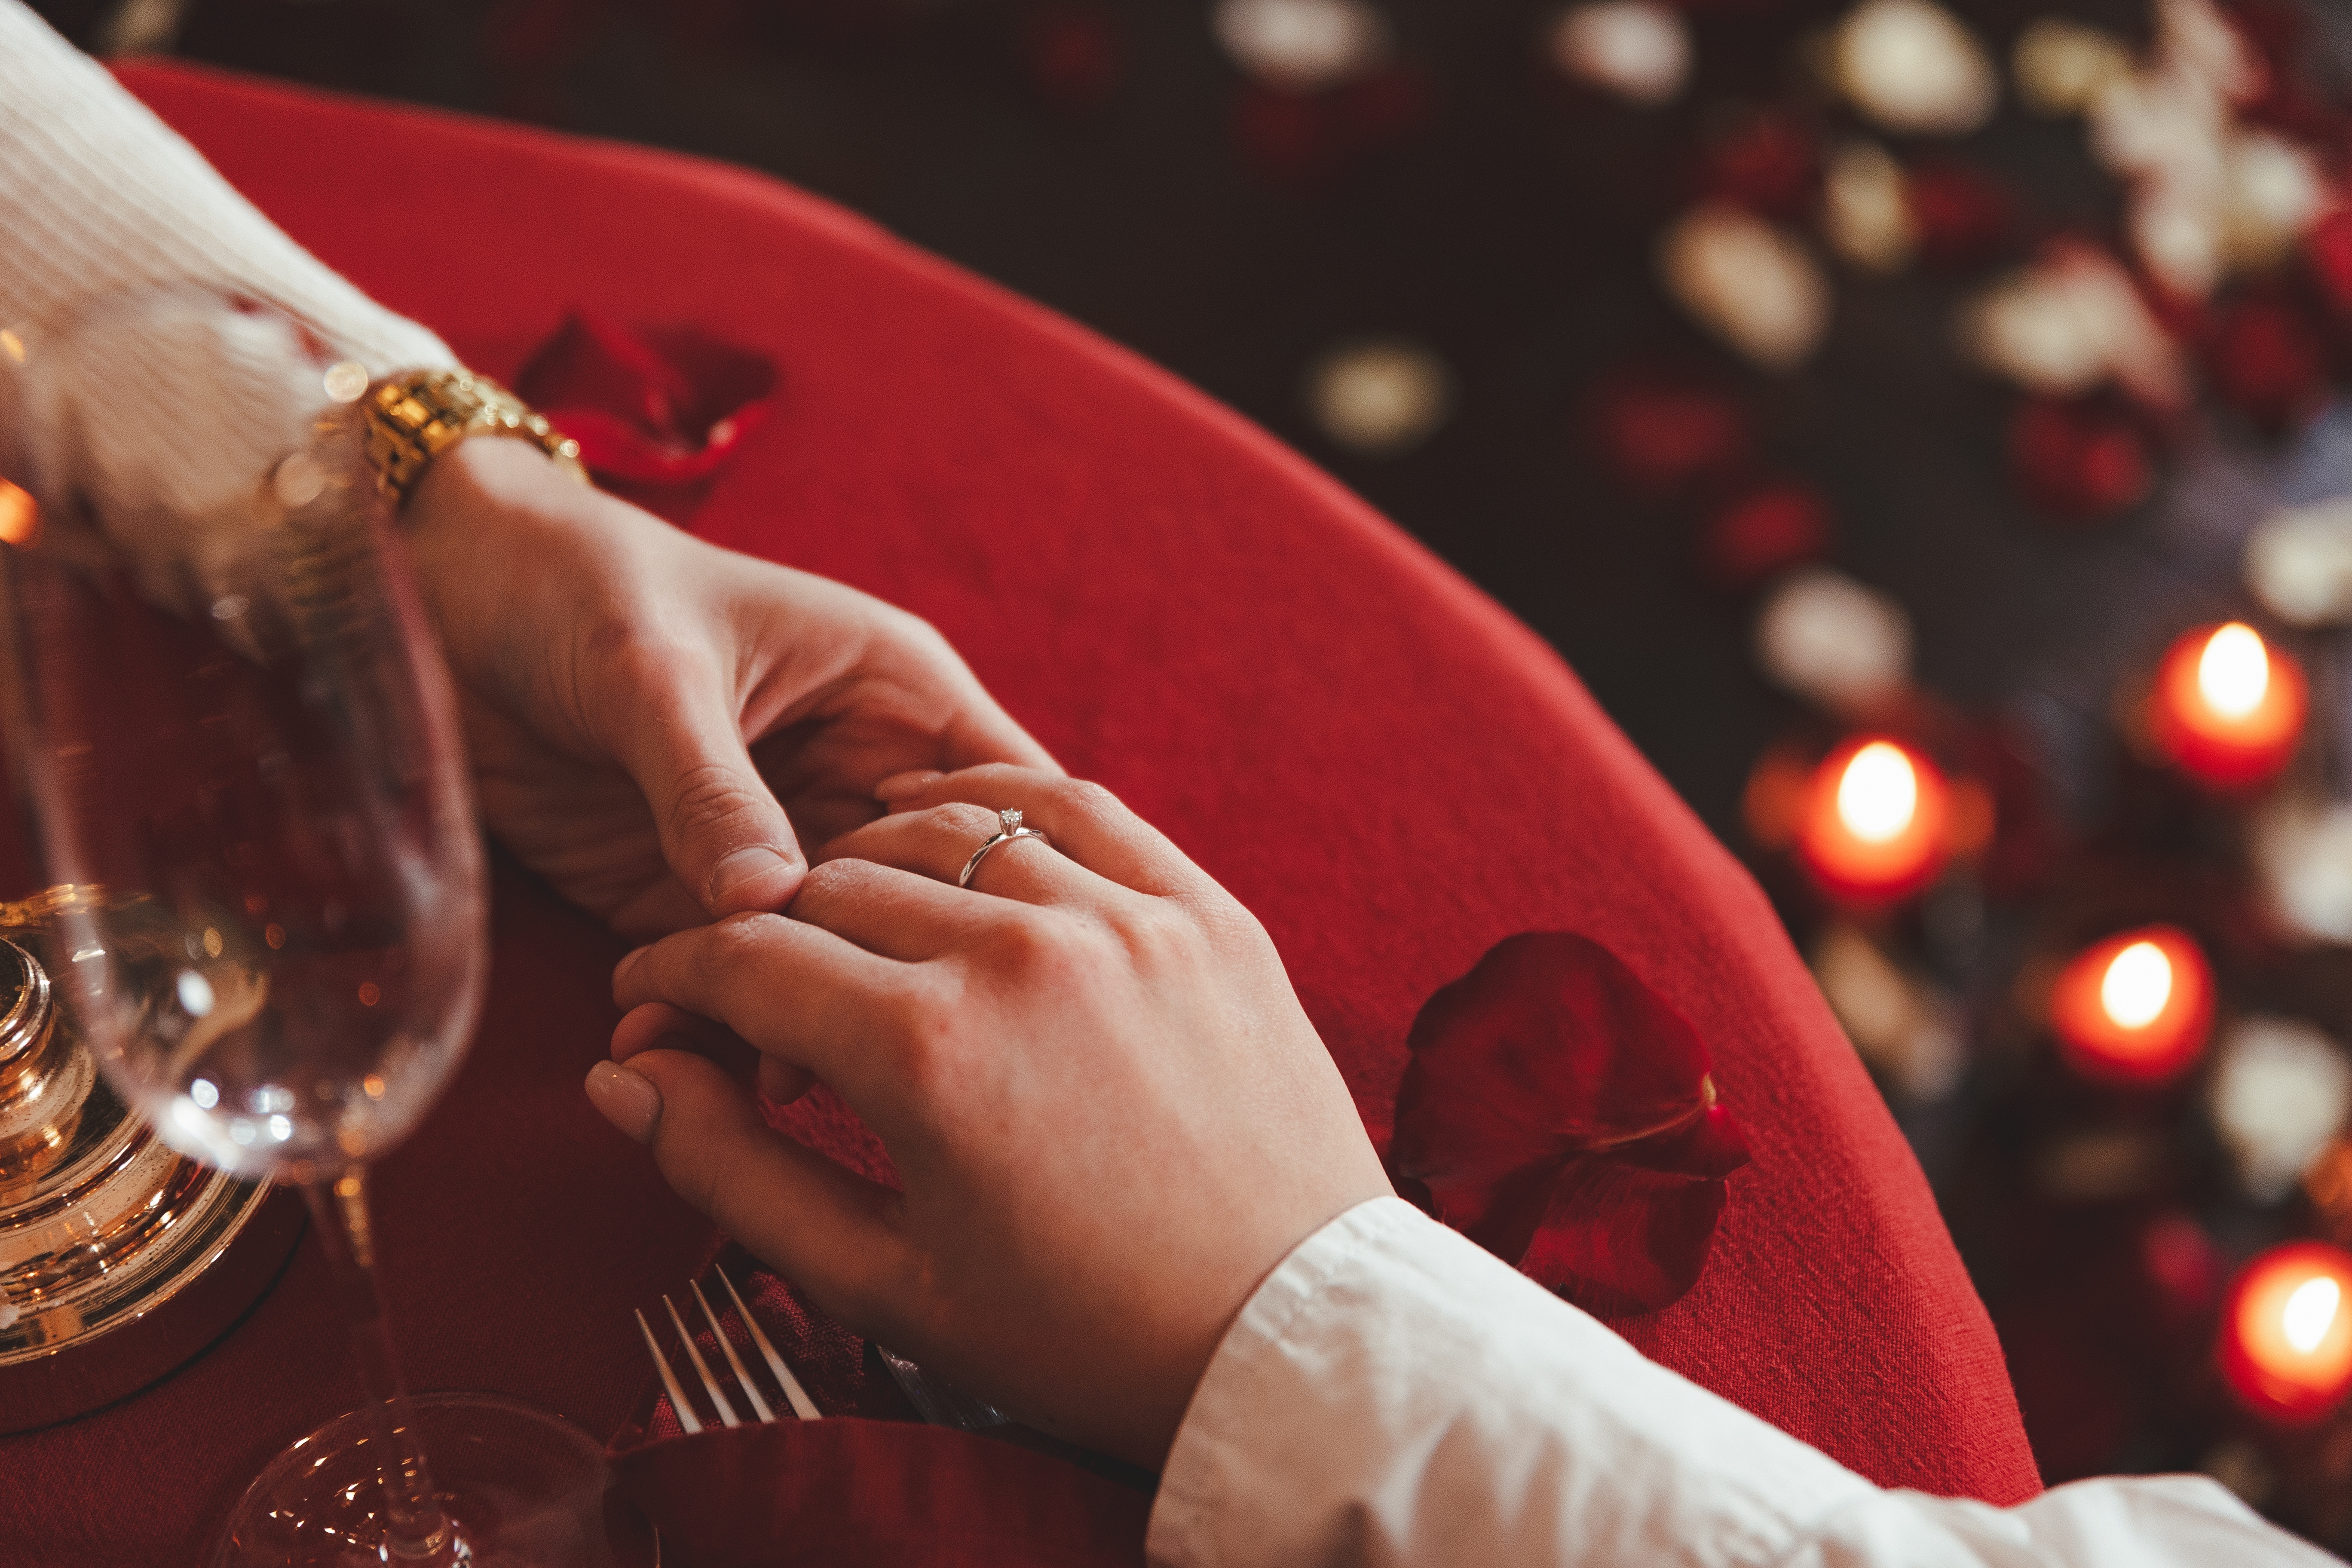 Engaged couple holding hands at dinner | Source: Shutterstock